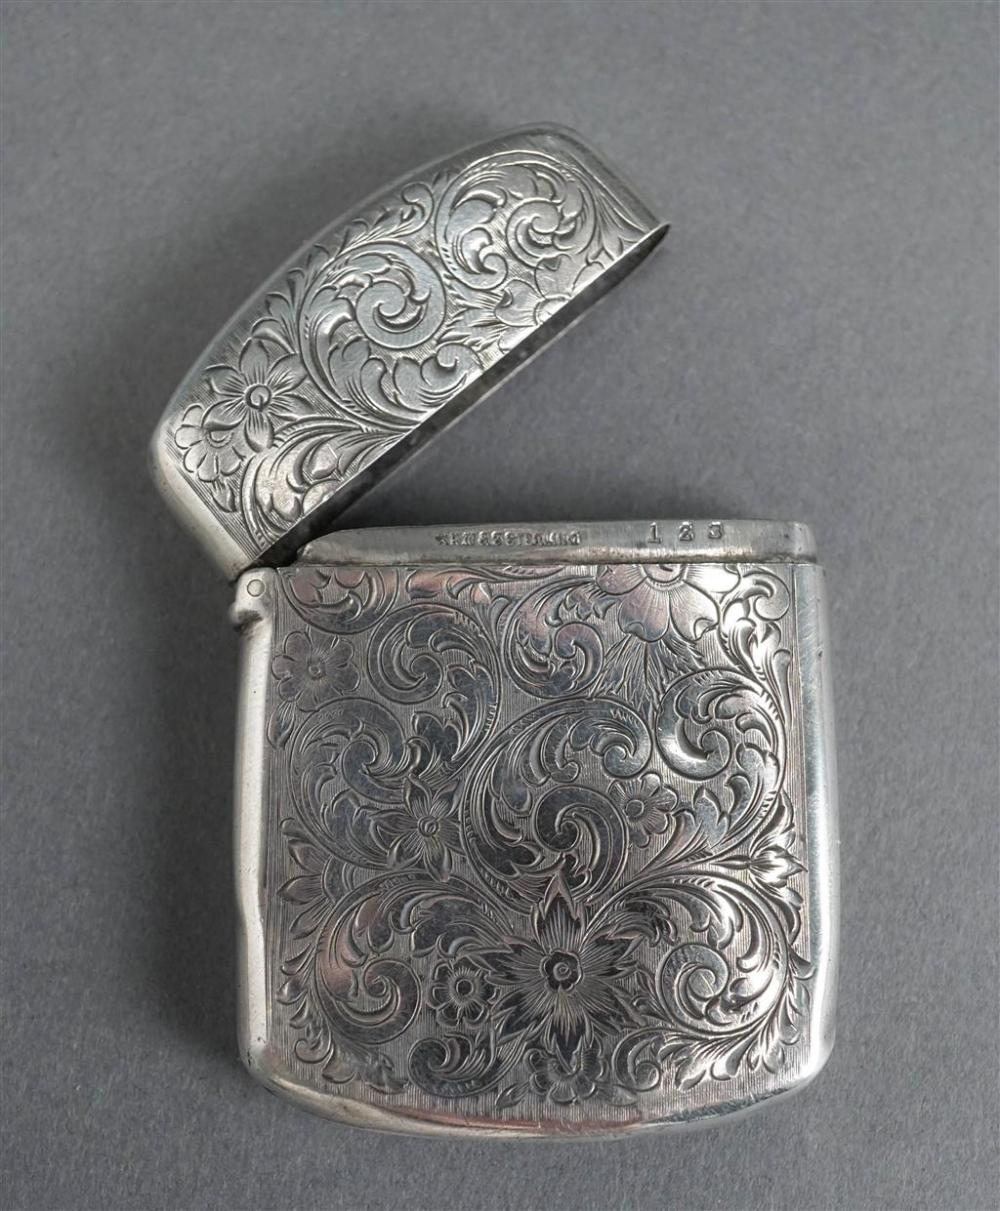 WALLACE STERLING SILVER MATCH SAFE  326d47